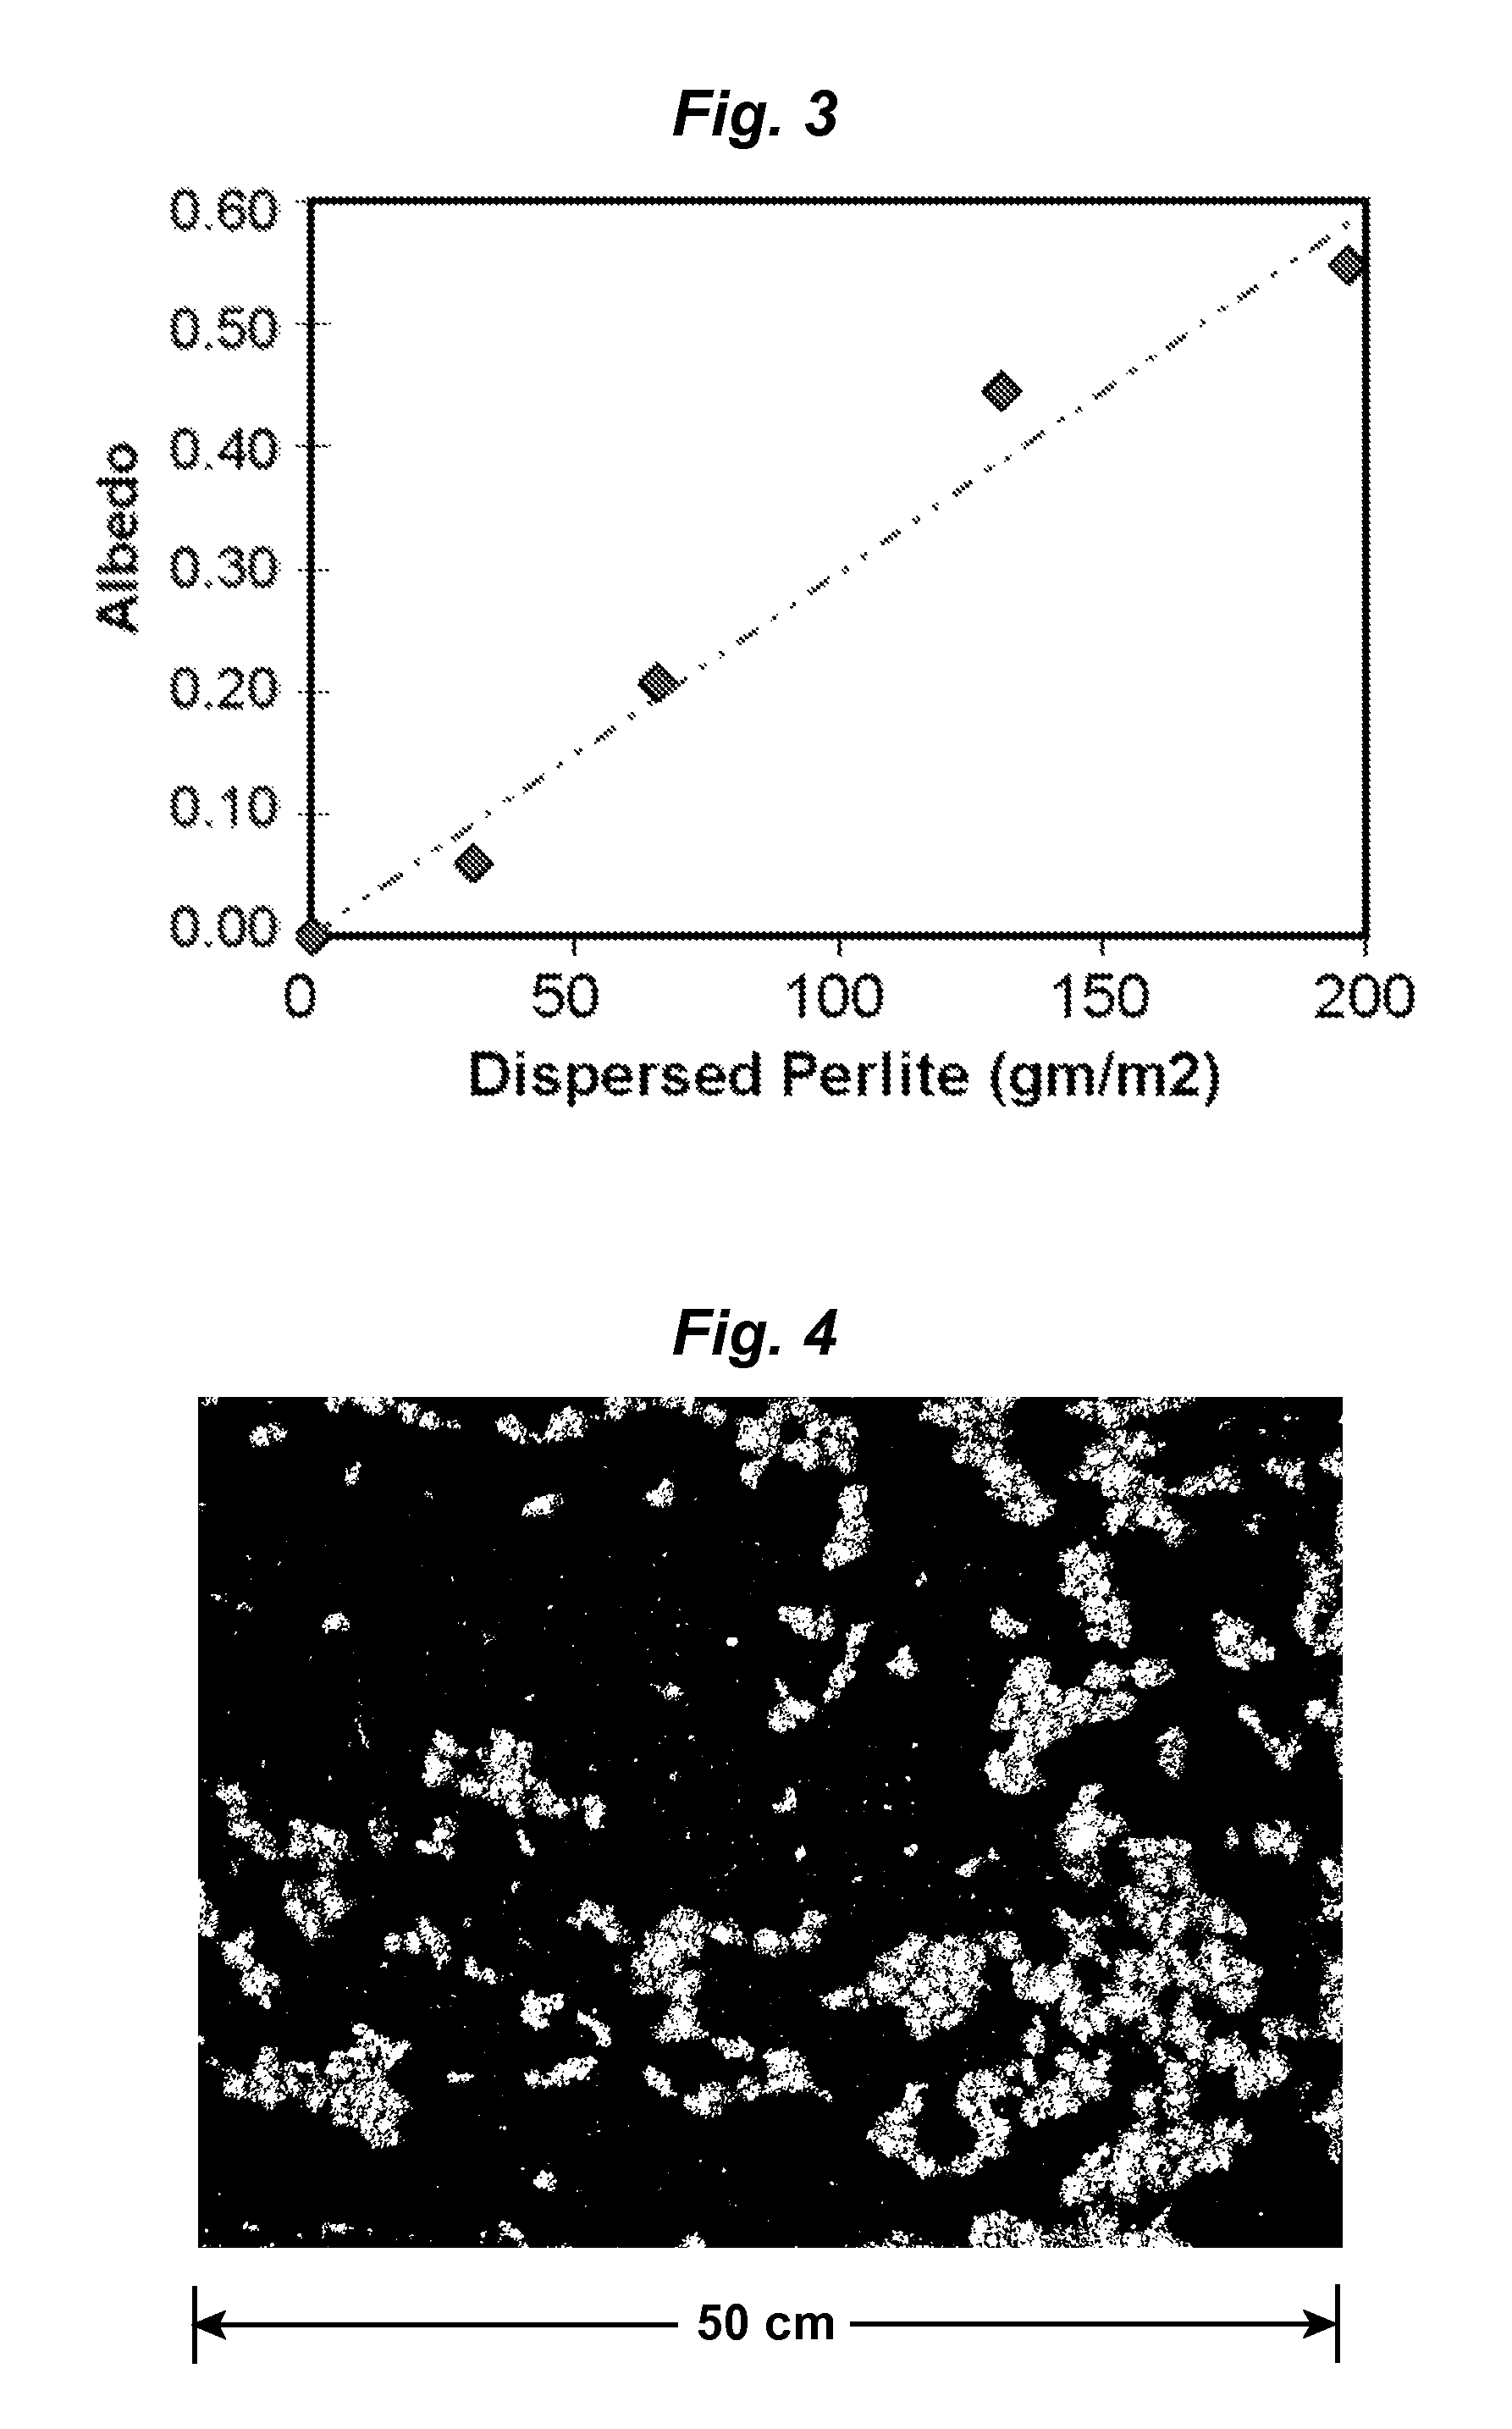 Biophysical geoengineering compositions and methods